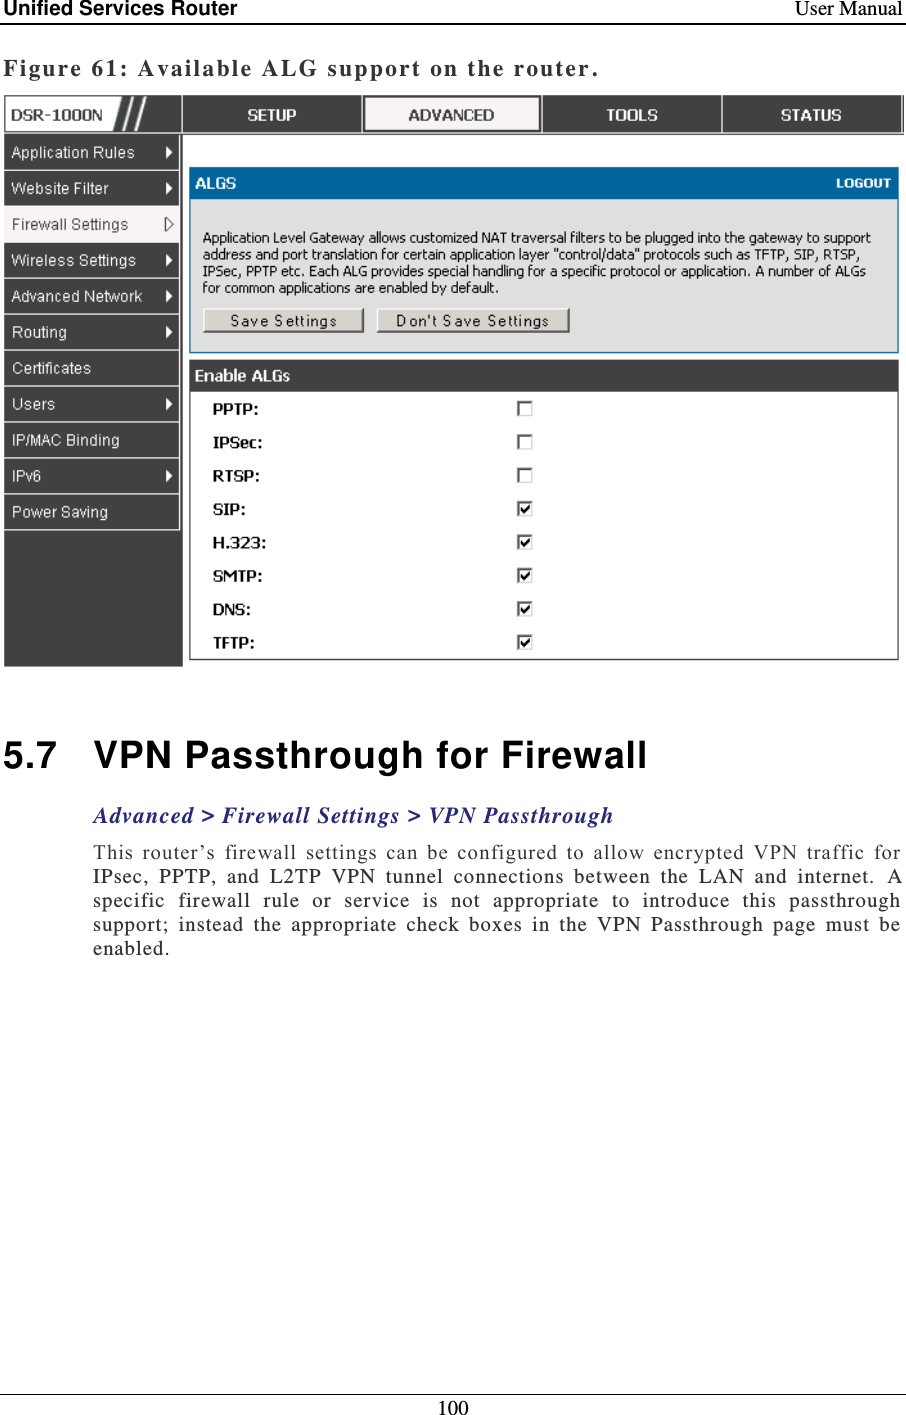 Unified Services Router    User Manual 100  Figure 61: Availa ble  ALG support on the router .   5.7  VPN Passthrough for Firewall Advanced &gt; Firewall Settings &gt; VPN Passthrough This  router’s  firewall  settings  can  be  configured  to  allow  encrypted  VPN  traffic  for IPsec,  PPTP,  and  L2TP  VPN  tunnel  connections  between  the  LAN  and  internet.   A specific  firewall  rule  or  service  is  not  appropriate  to  introduce  this  passthrough support;  instead  the  appropriate  check  boxes  in  the  VPN  Passthrough  page  must  be enabled.  